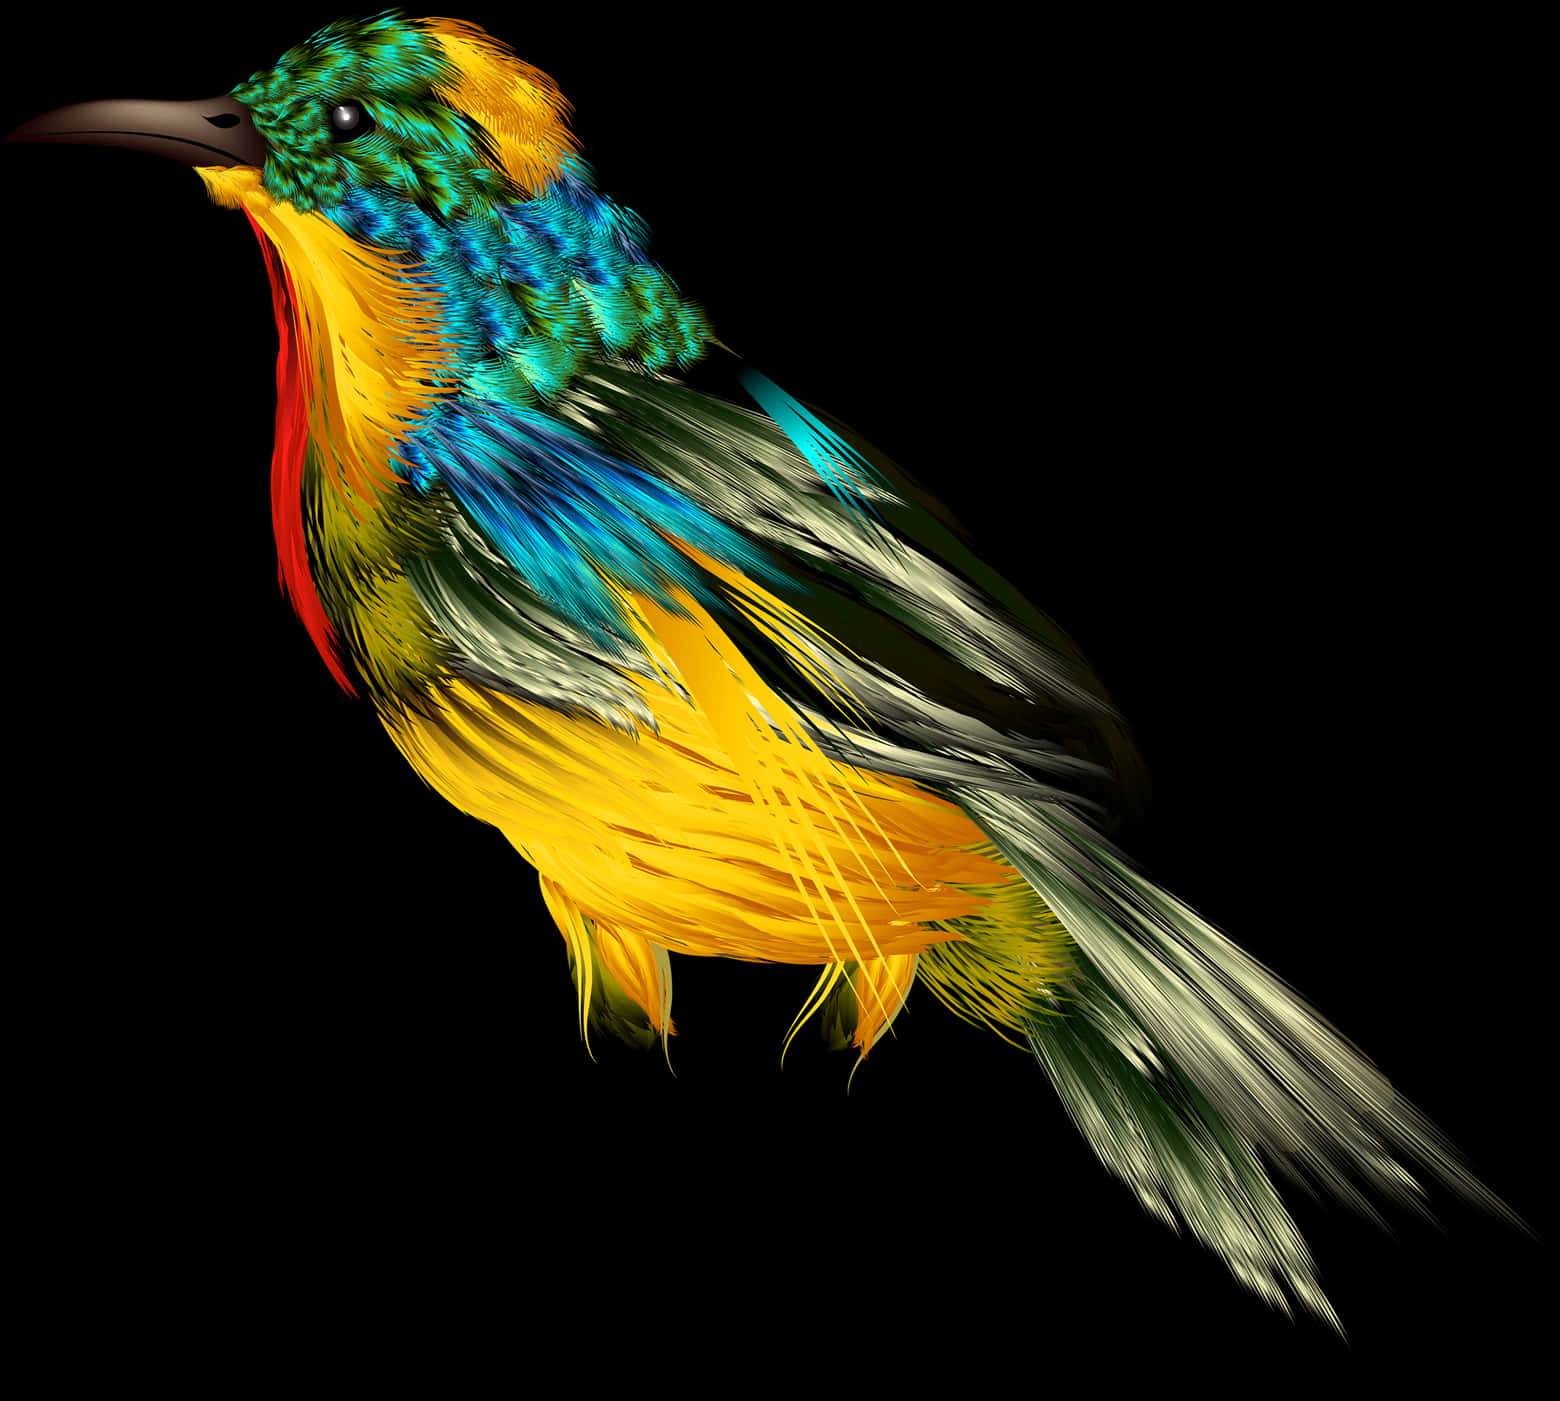 A Colorful Bird With Black Background